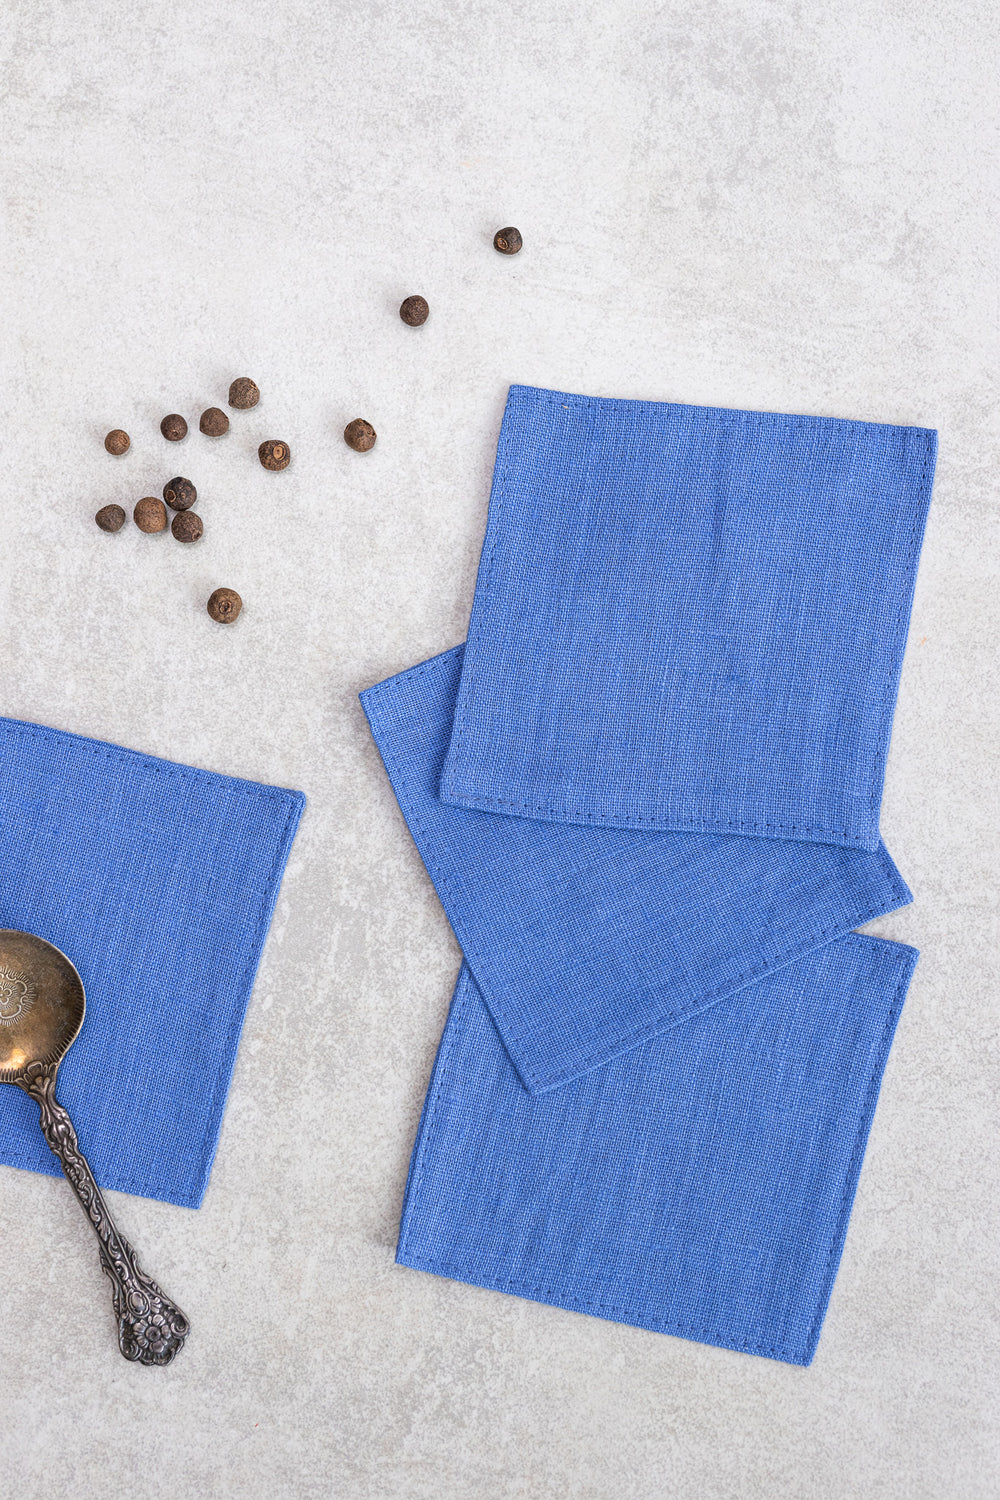 Linen Coasters Set Of 4 In Blue